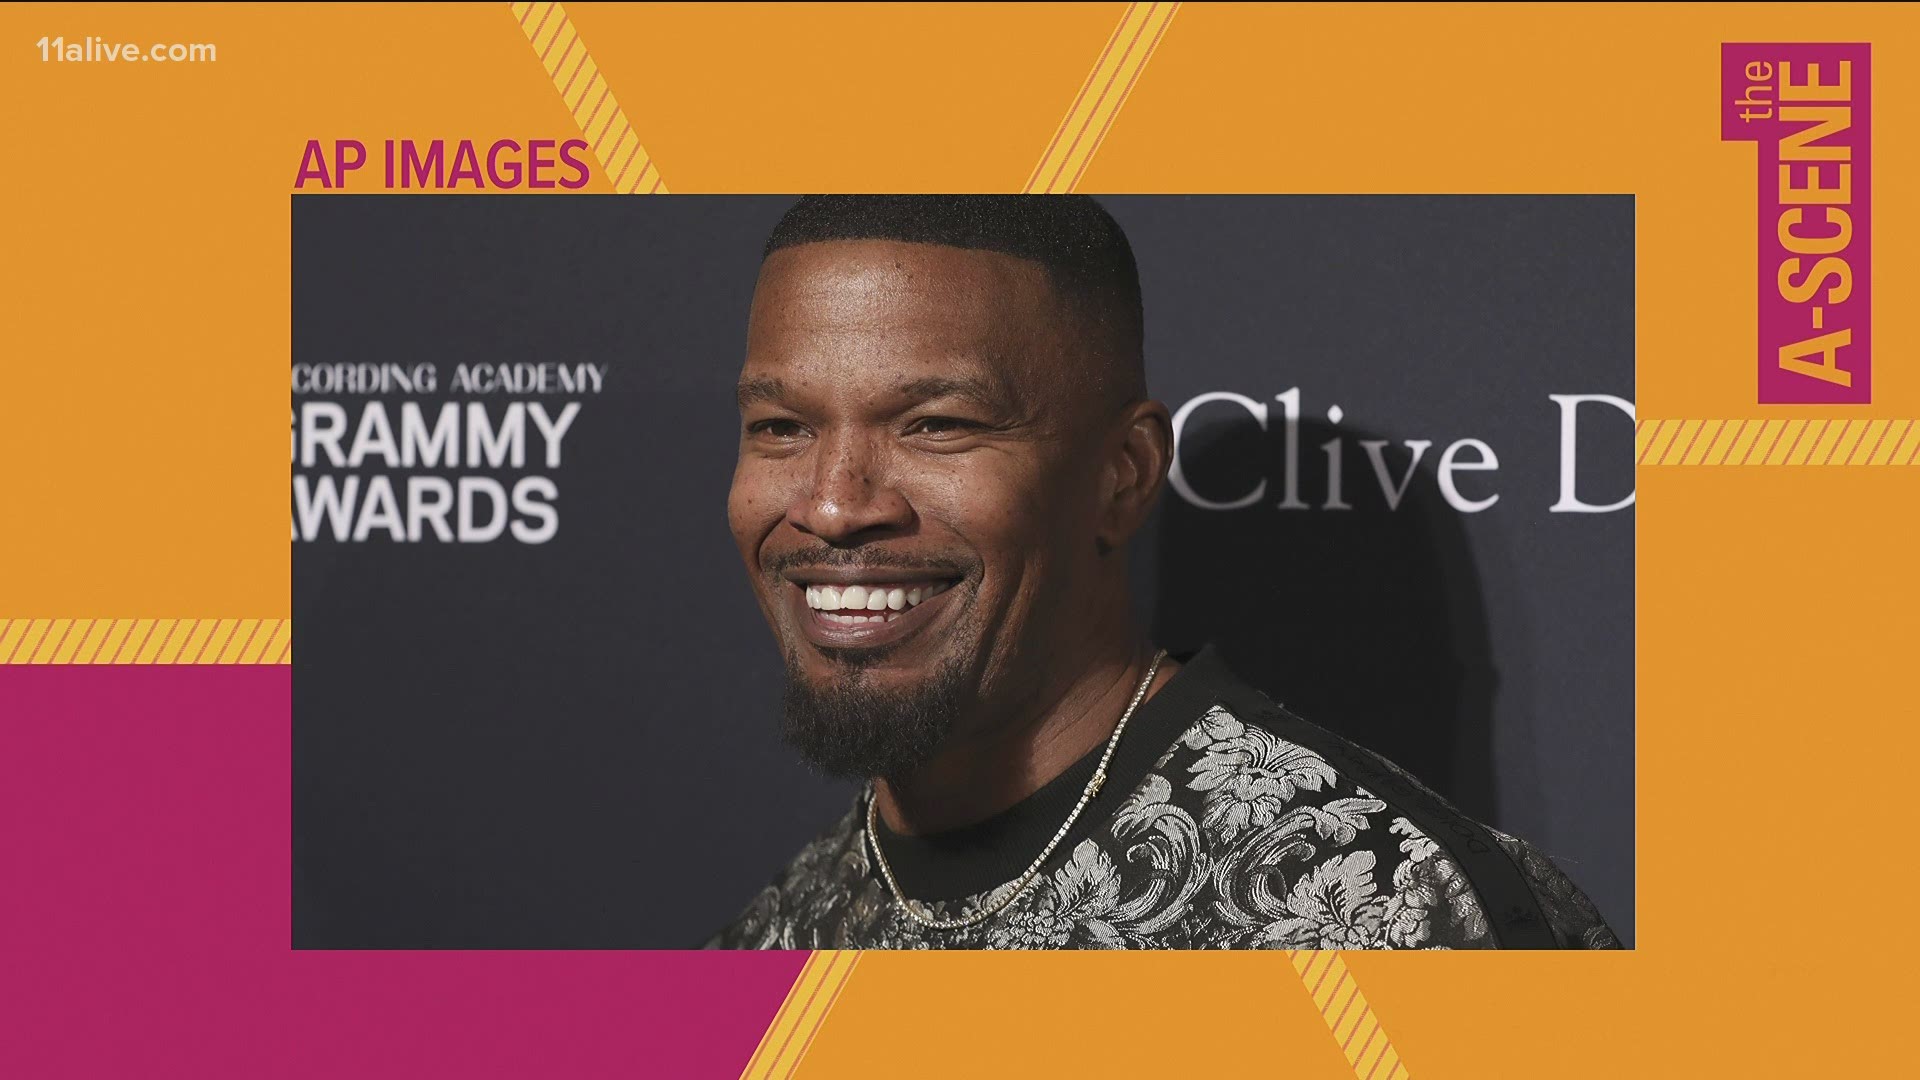 The internet was excited to learn that Jamie Foxx was returning in Spiderman 3!